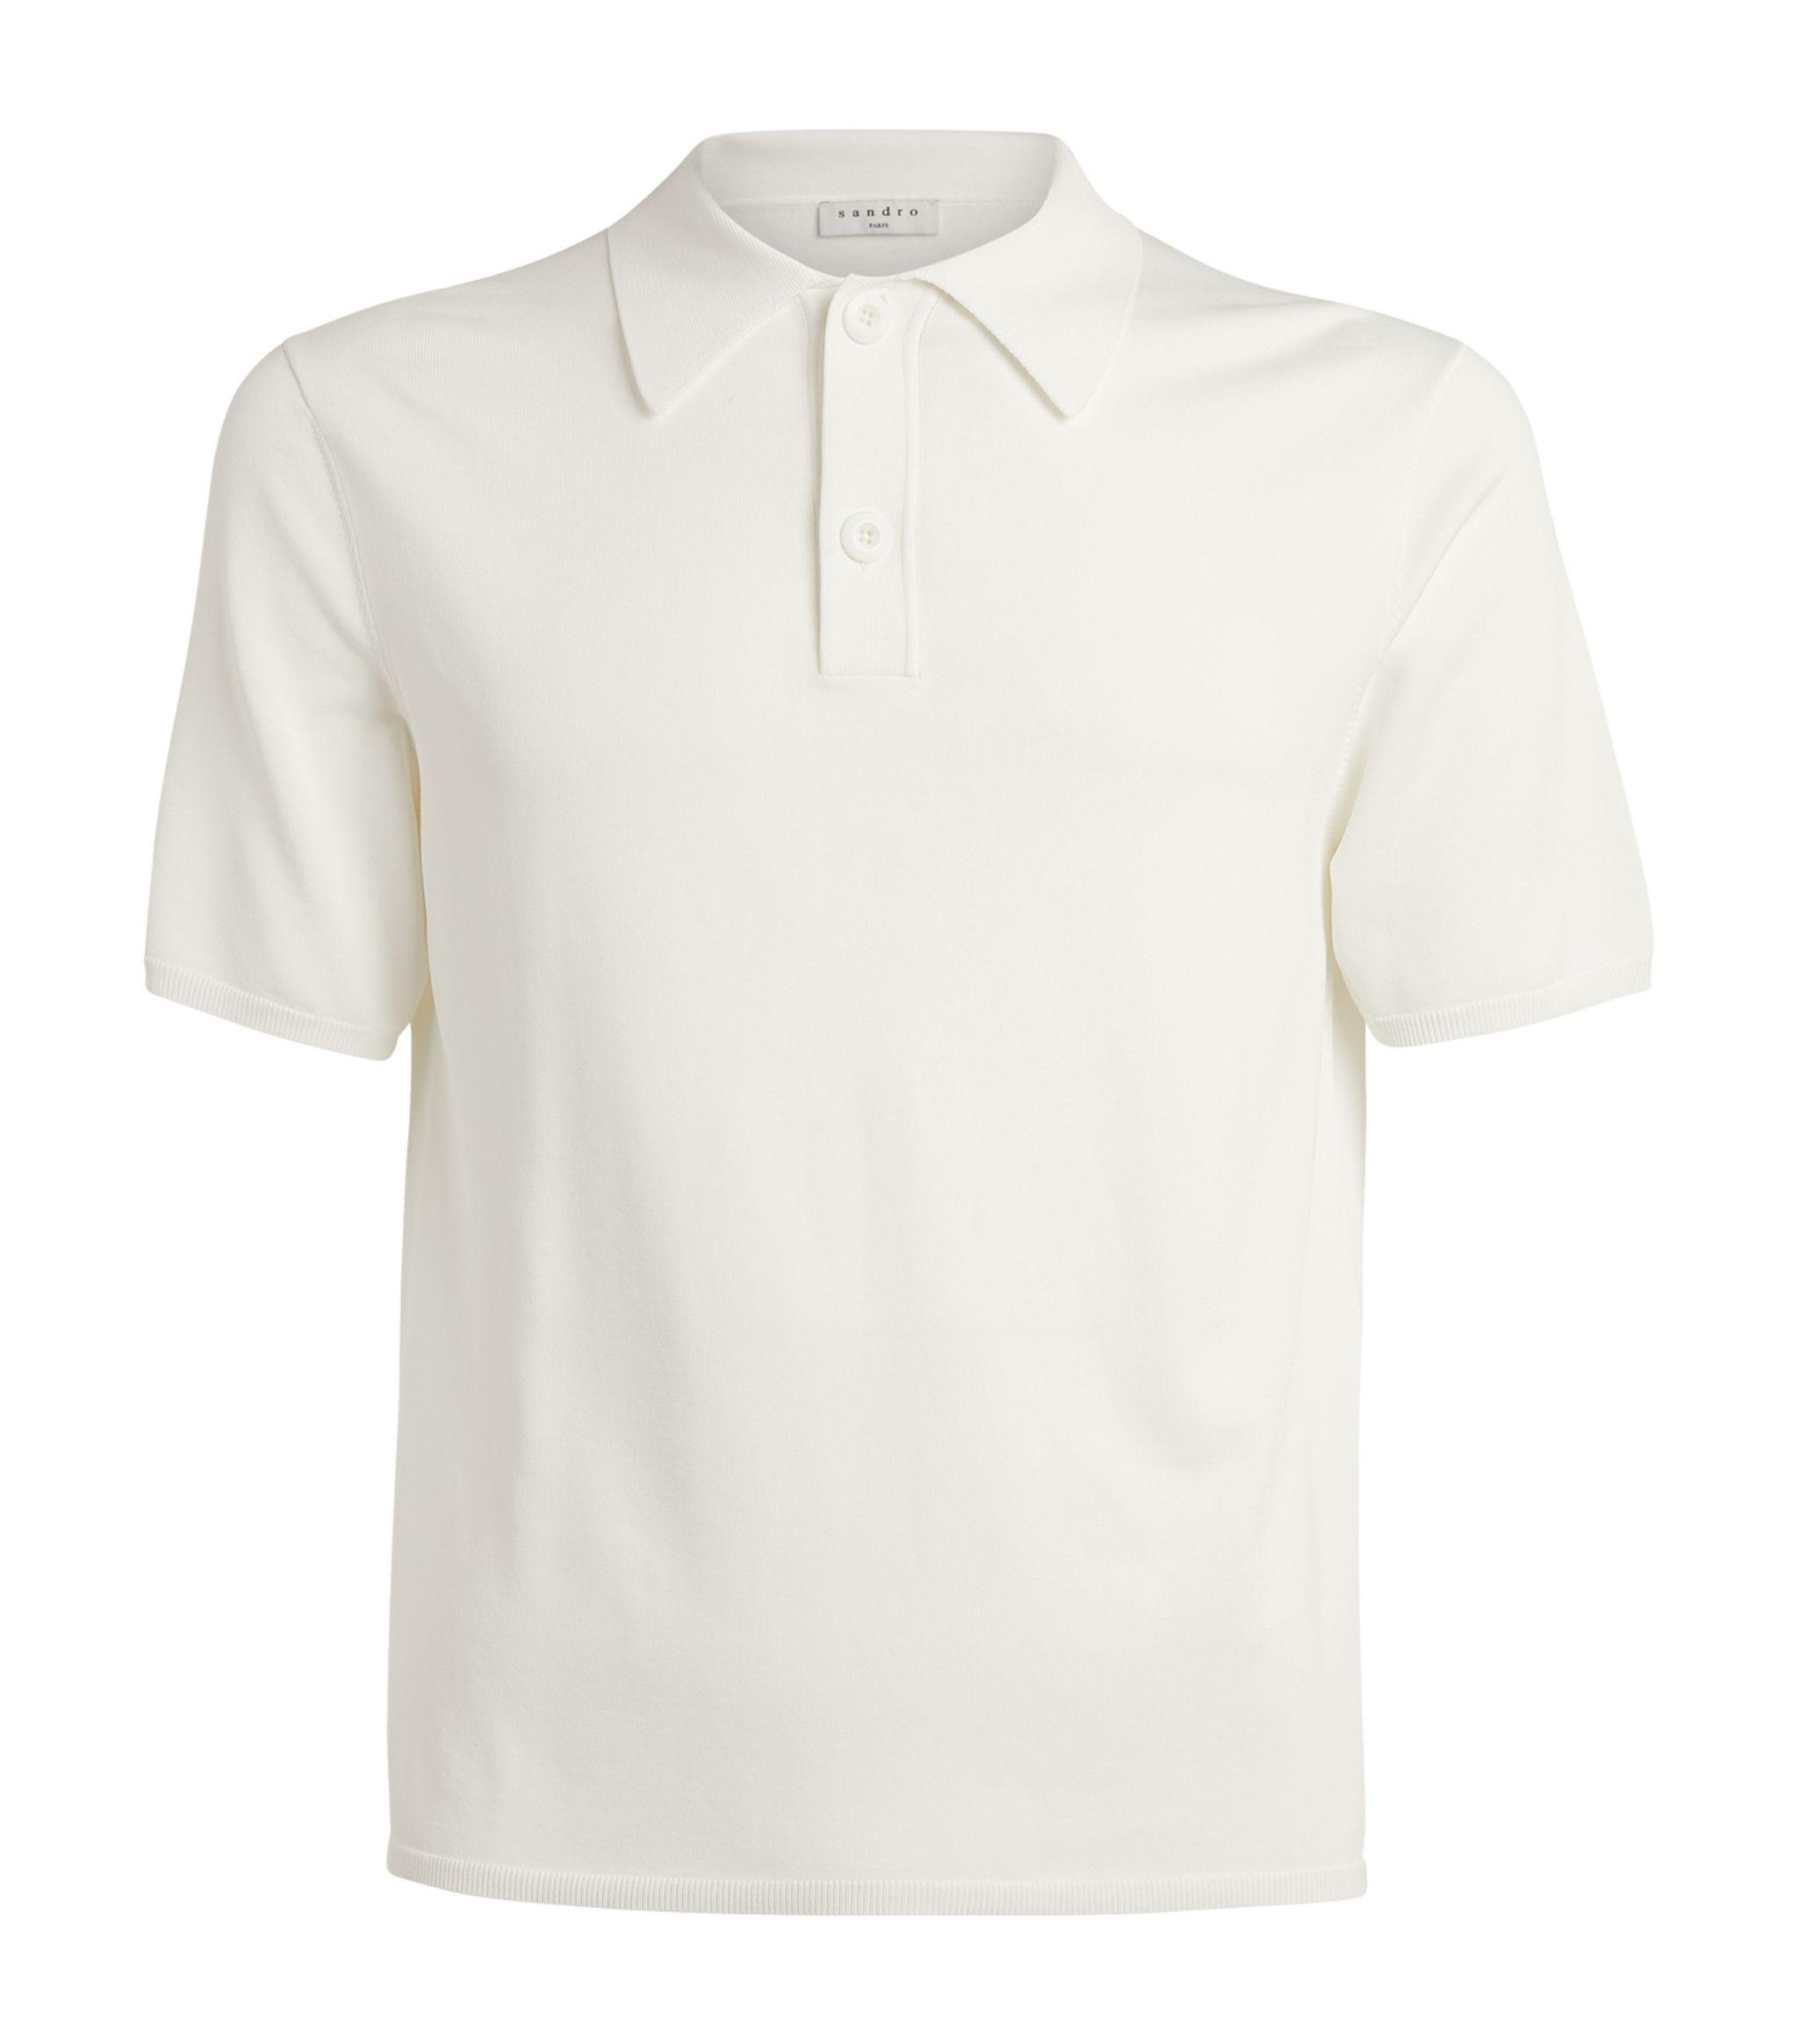 Sandro Synthetic Fine-knit Polo Shirt in White for Men - Lyst